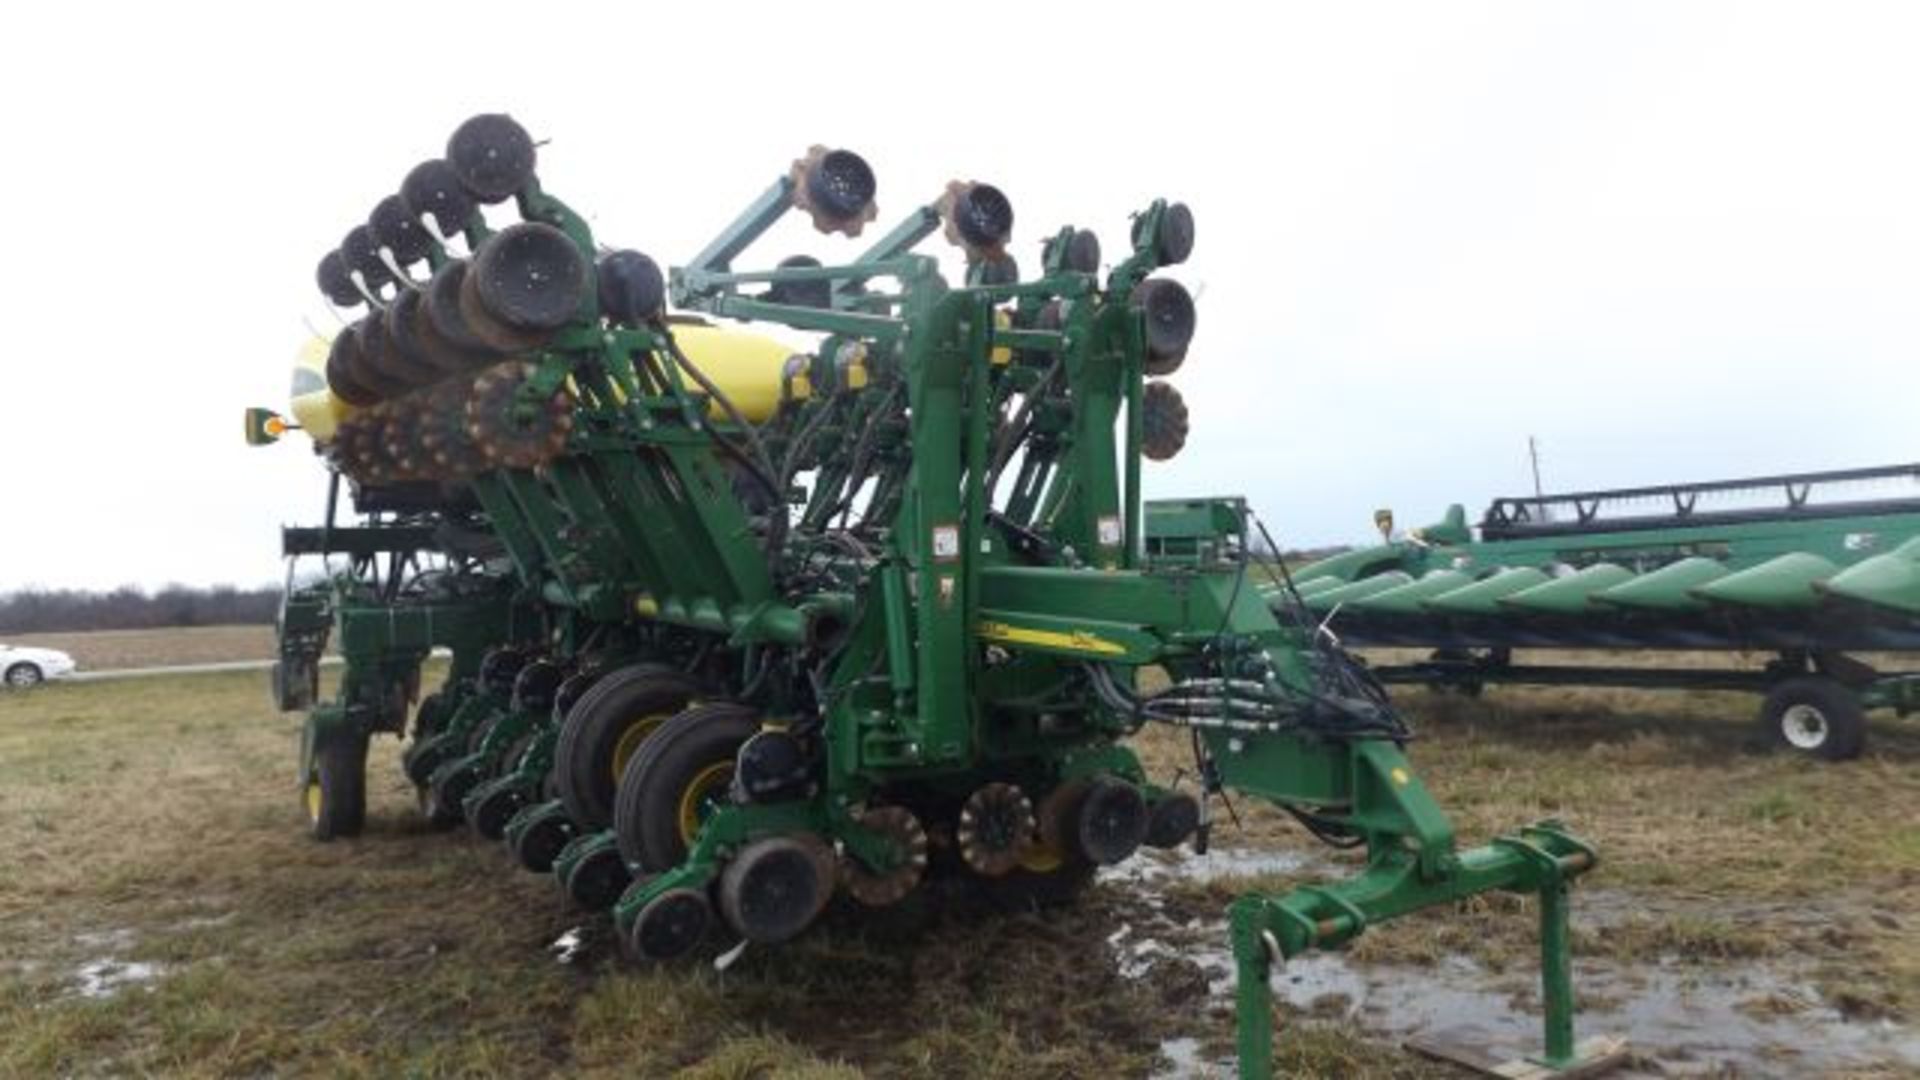 2013 JD 1790 Planter, 16/31, N/T, 3200 total acres on it, Variable Rate Drive, Row Command Clutches, - Image 2 of 3